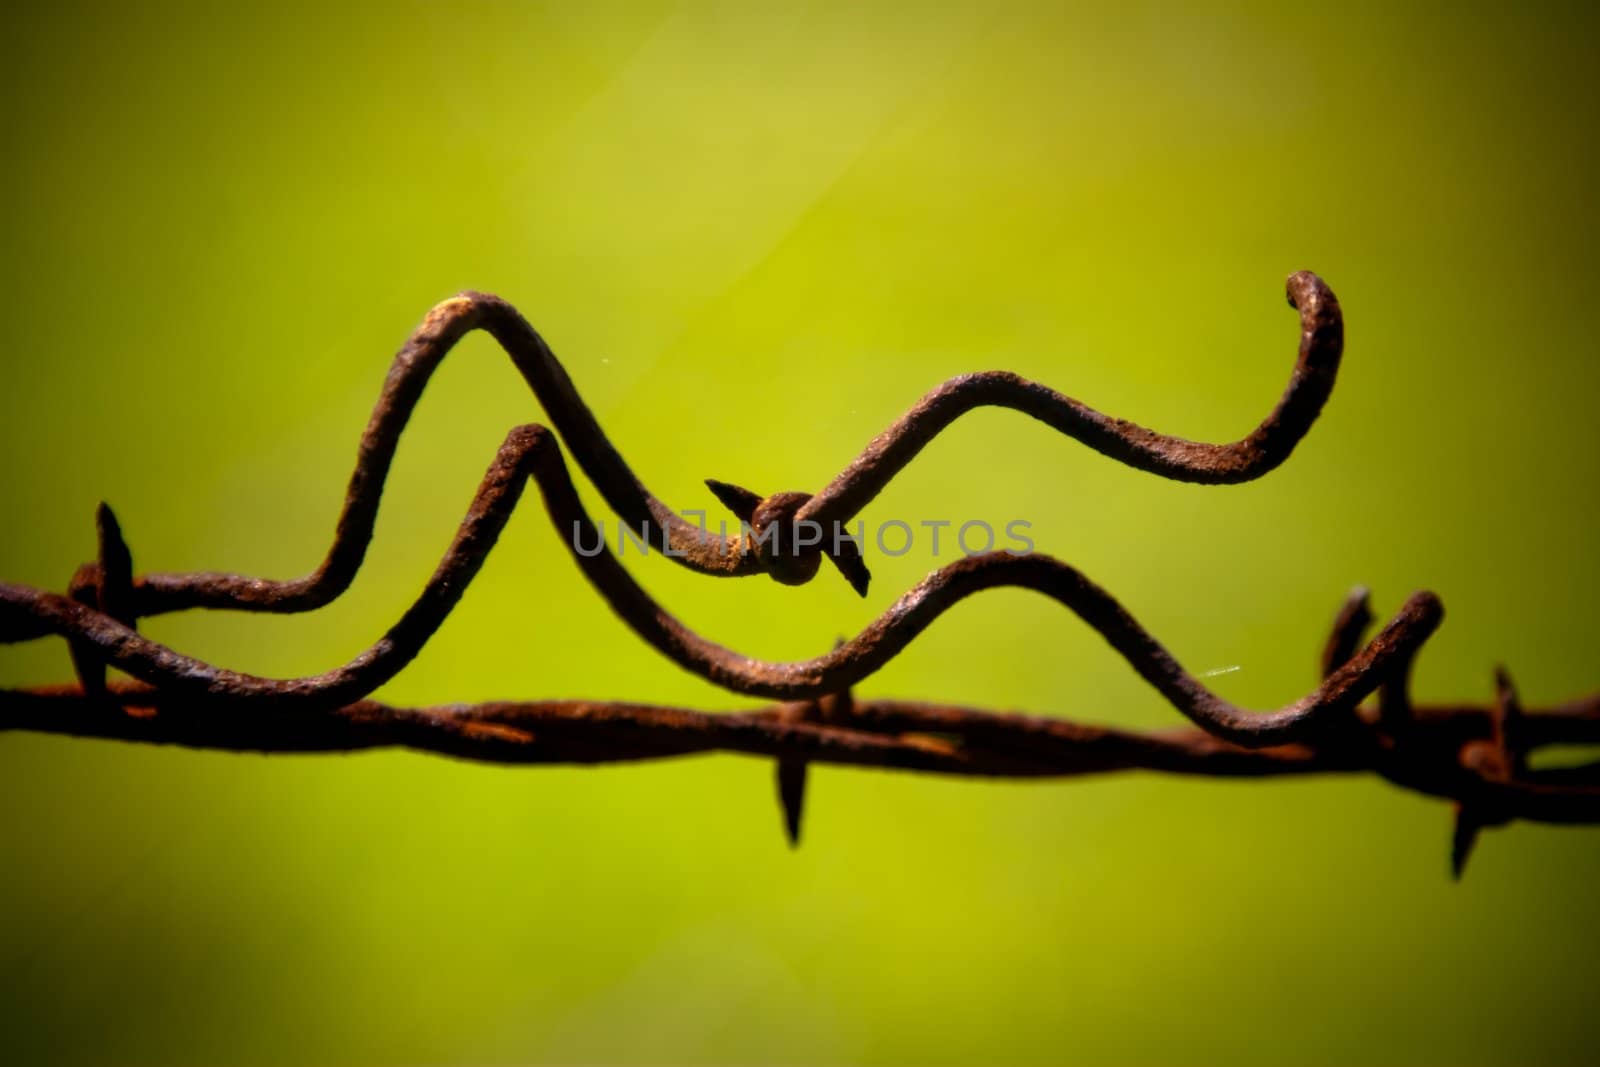 Rusty wire by timscottrom